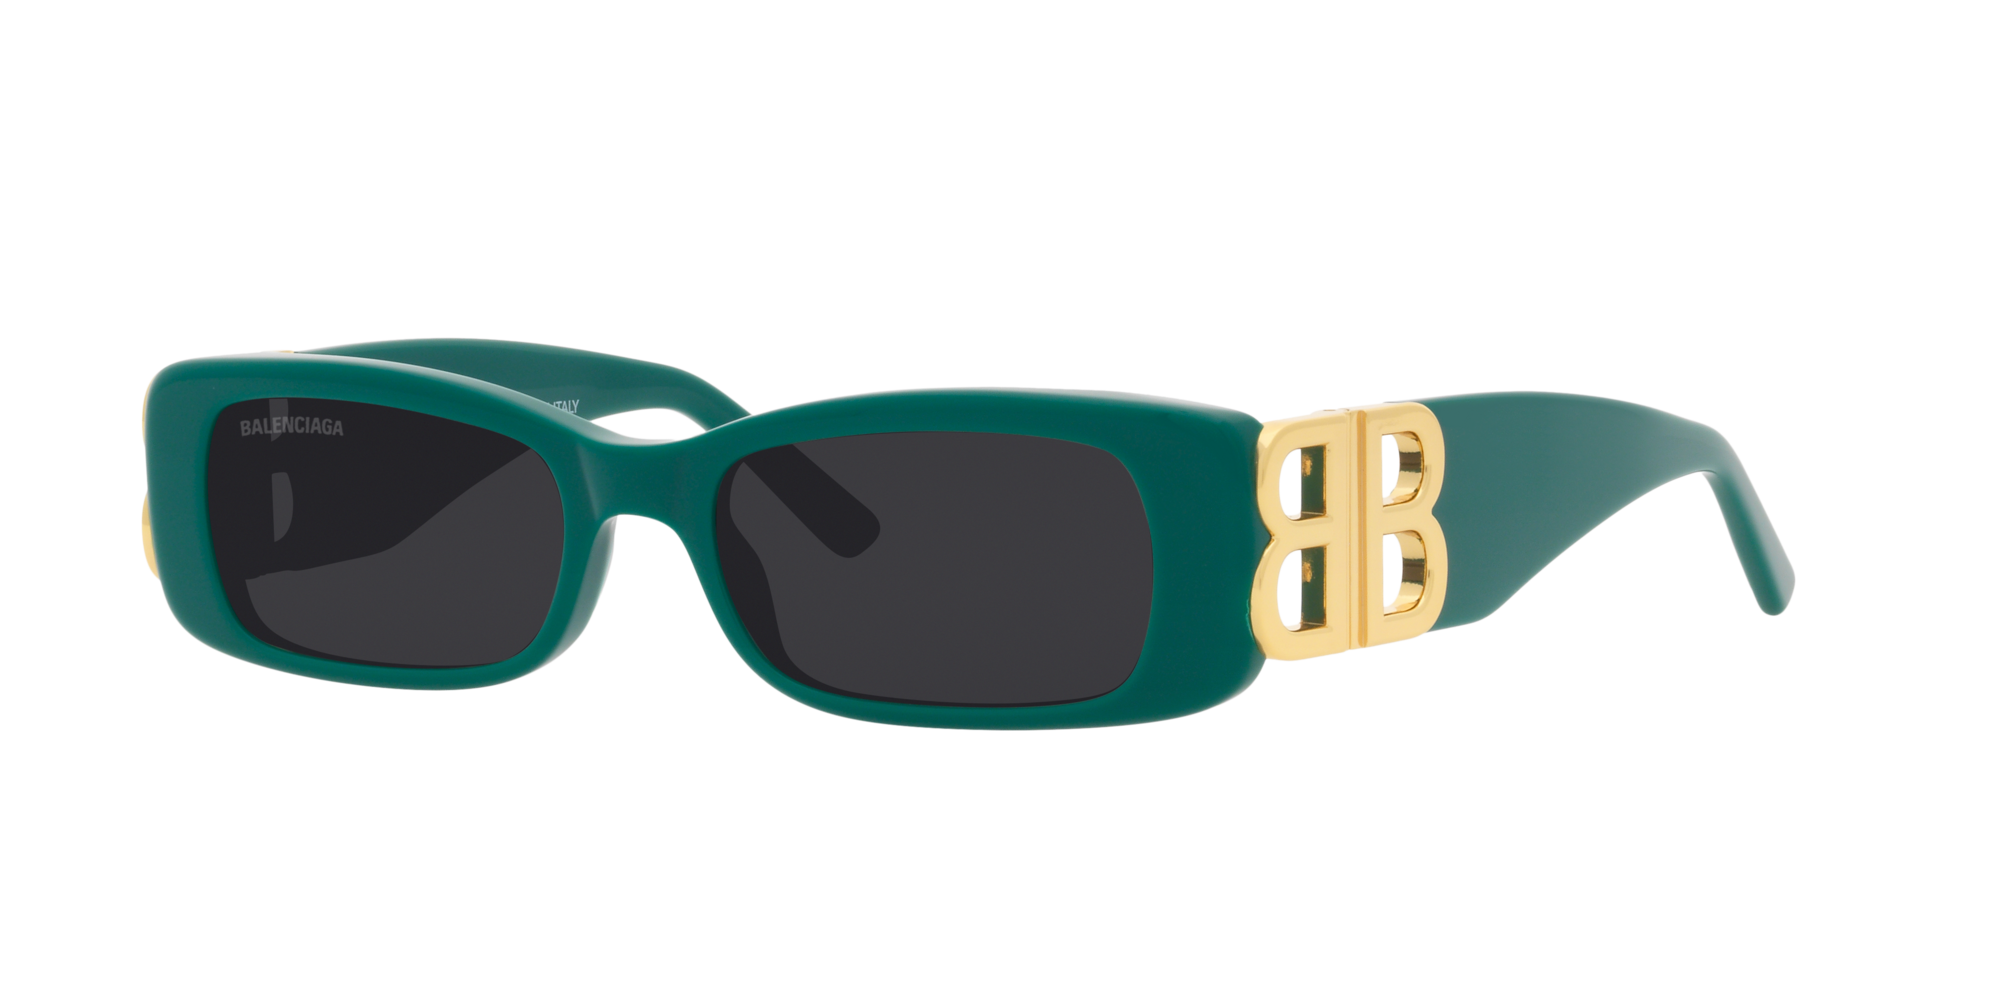 Walleva Emerald Polarized Replacement Lenses for Ray-Ban Clubmaster RB3016  51mm Sunglasses - Walmart.com